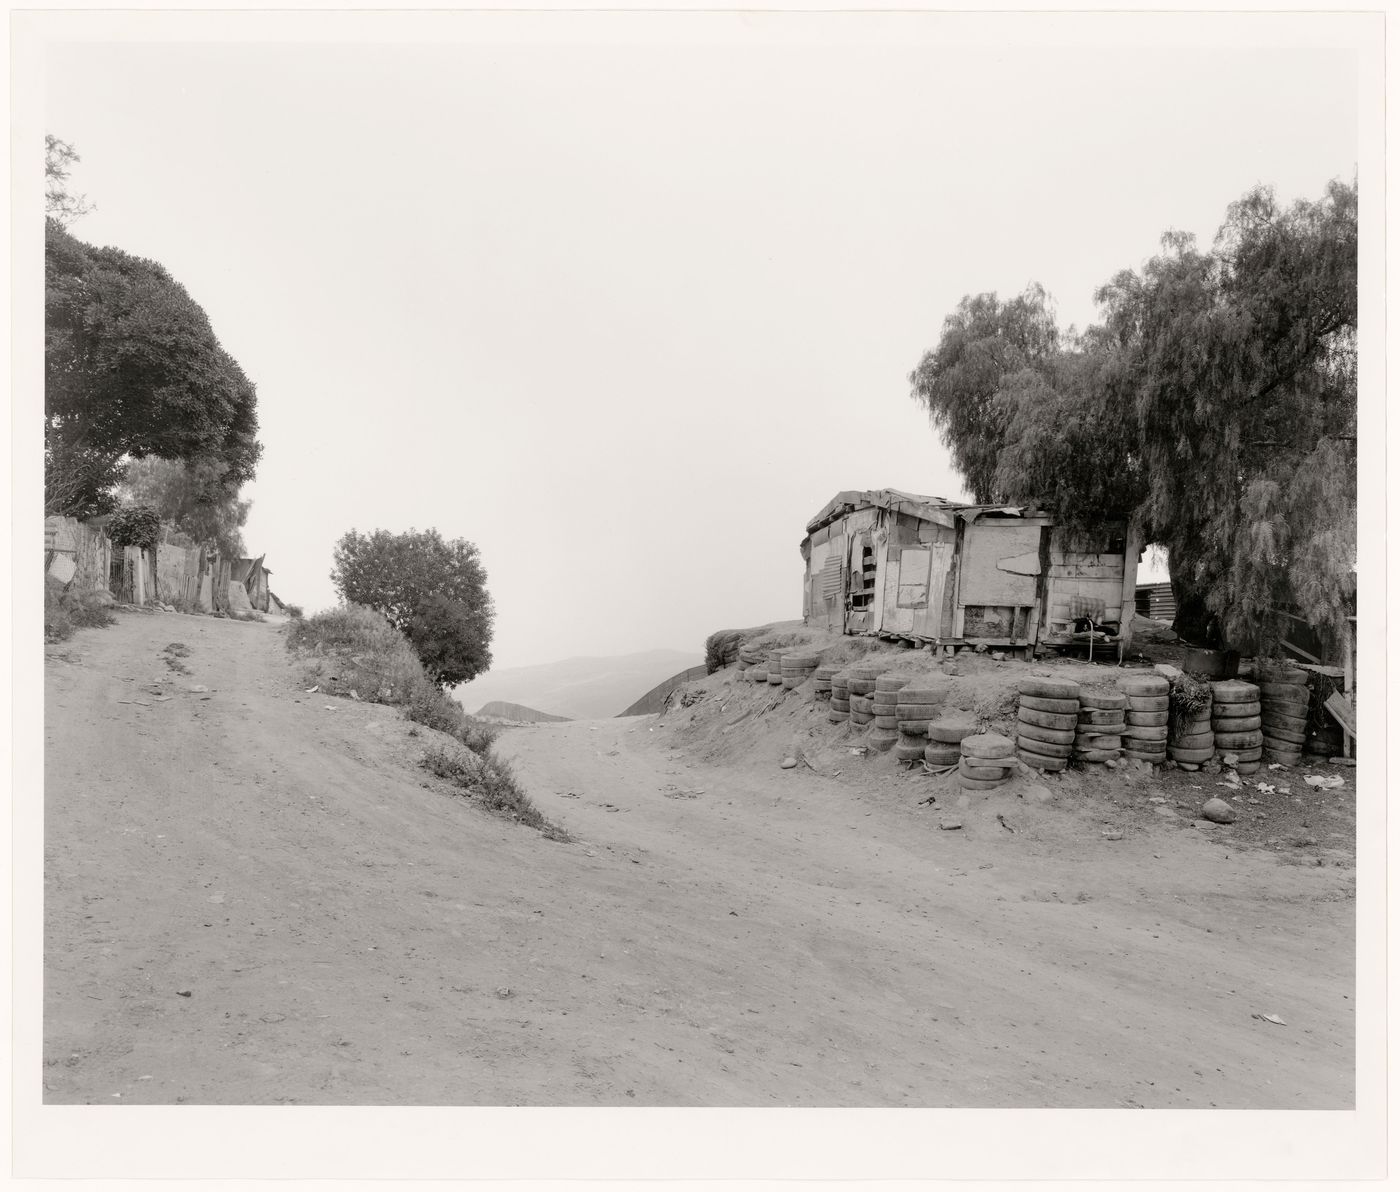 View of dirt road and dwelling showing a partial view of United States-Mexico border fence, San Diego County, California, United States and Colonia Libertad, Tijuana, Baja California, Mexico